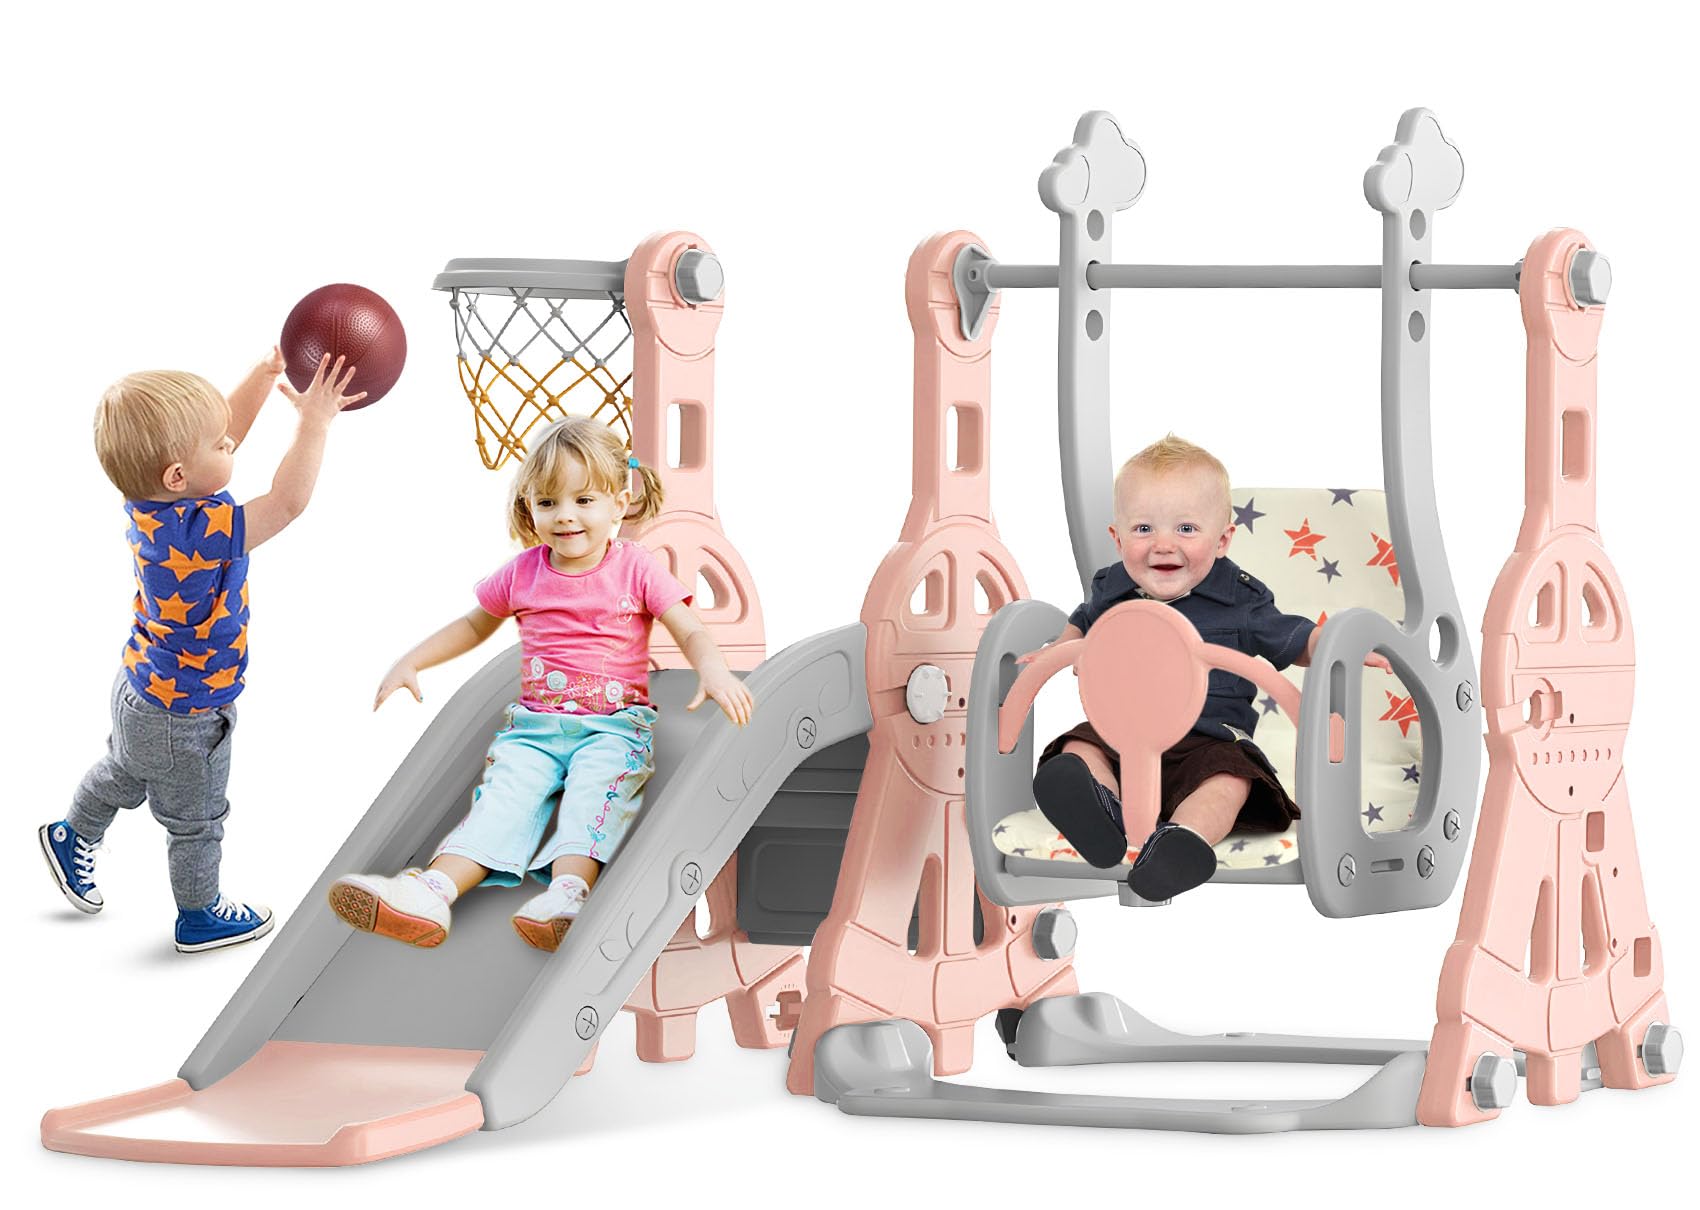 BIERUM 4 in 1 Toddler Slide and Swing Set, Kid Slide for Toddlers Age 1-3, Baby Slide with Basketball Hoop, Indoor Outdoor Slide Toddler Playset Toddler Playground Pink